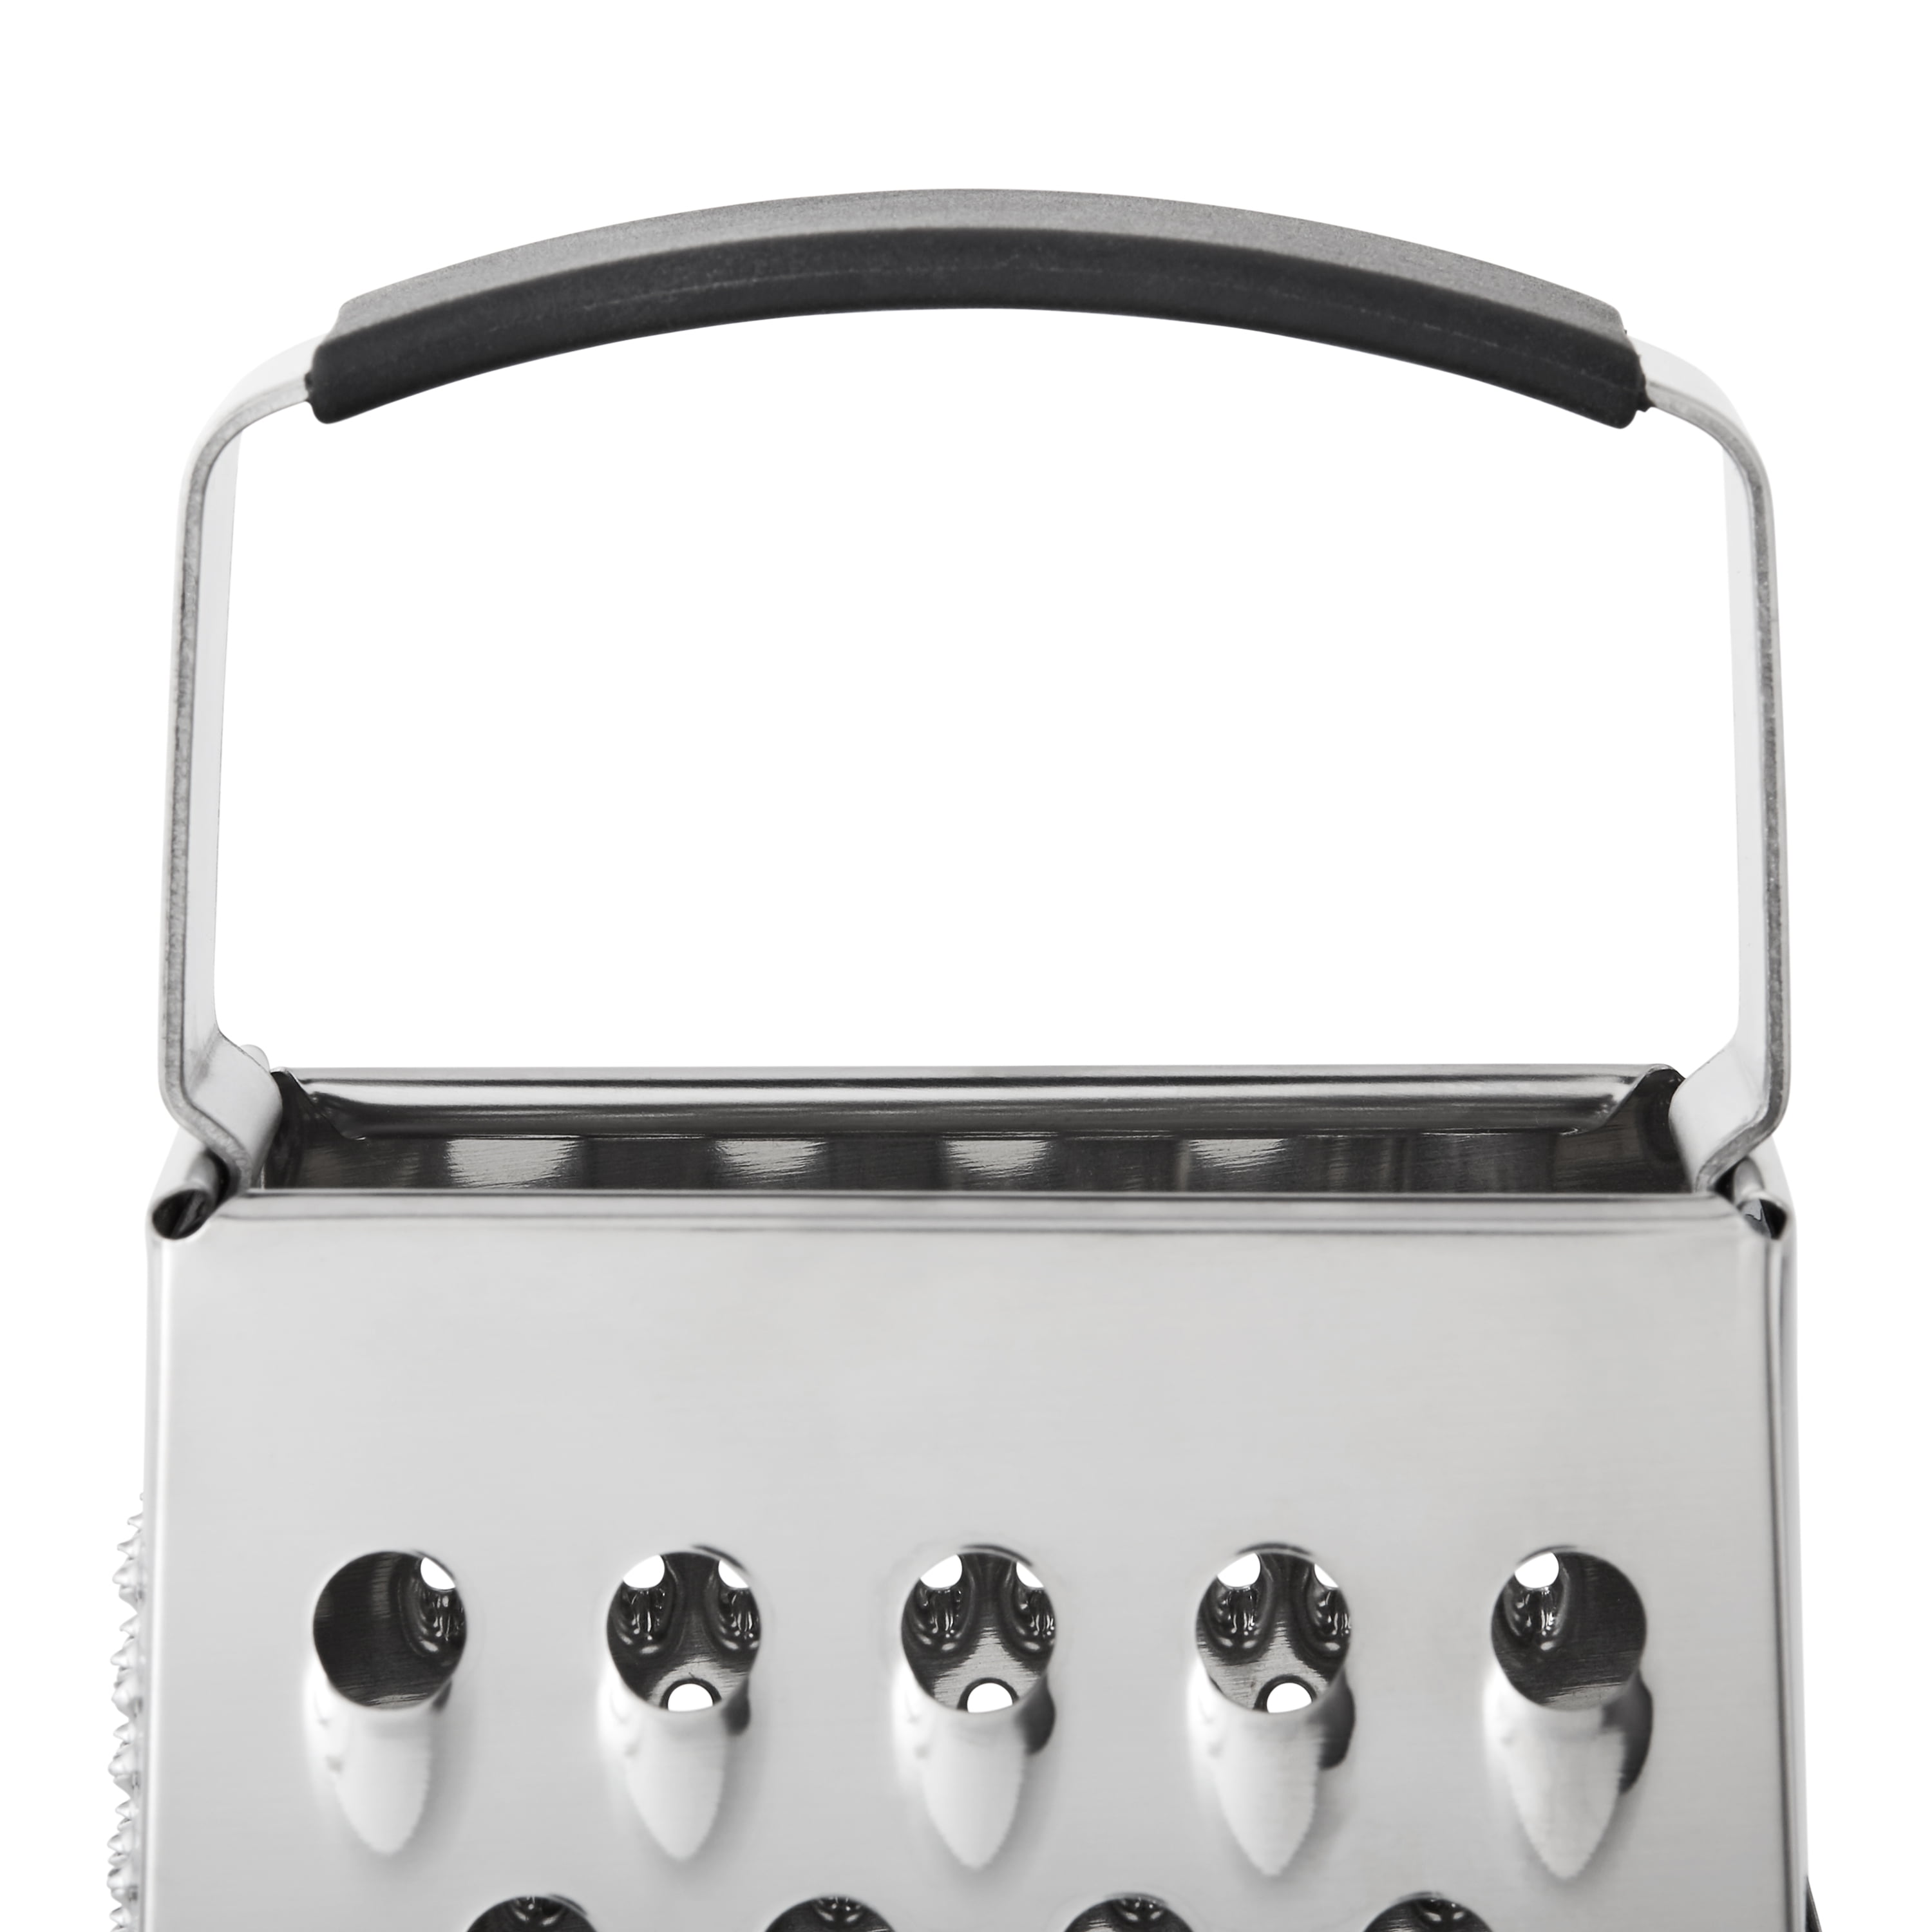 Mainstays Rotary Cheese Grater with Removable Stainless Steel Barrel, White